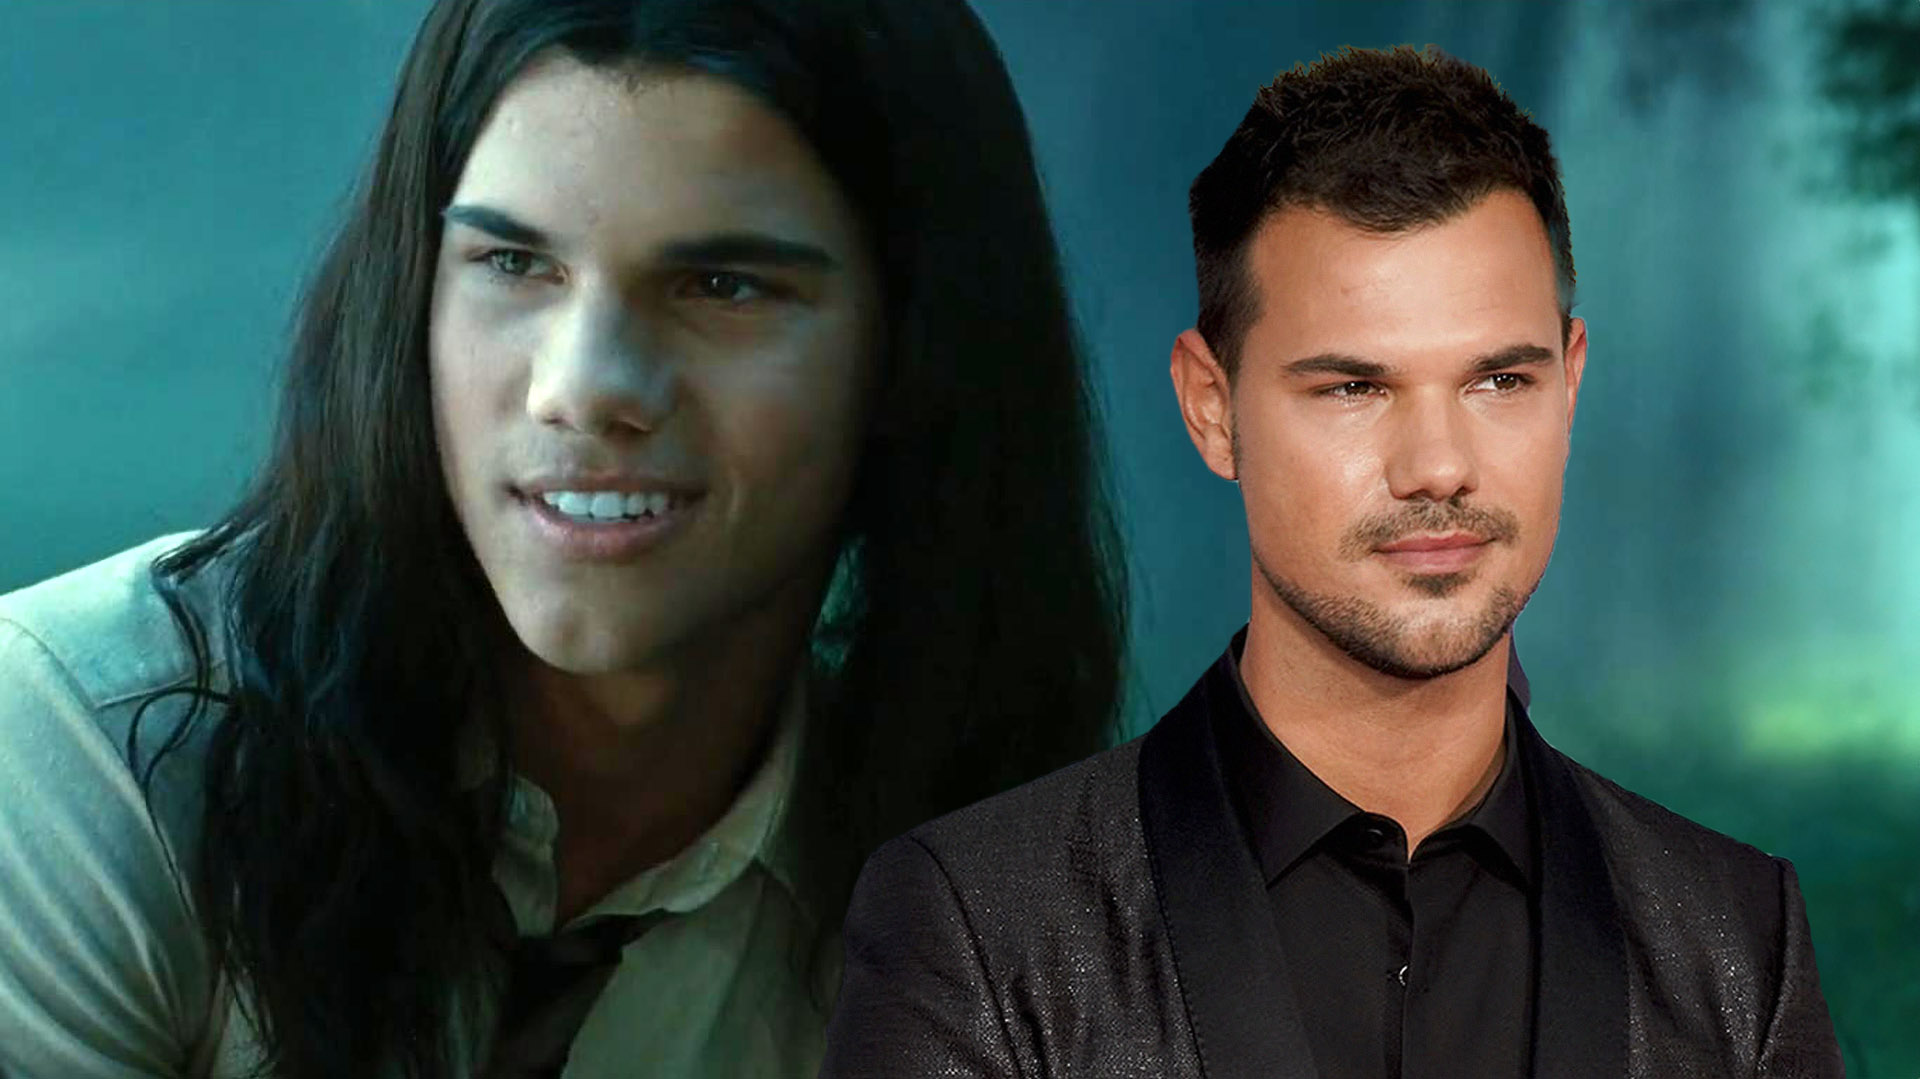 Twilight's Taylor Lautner Just Schooled The Internet On Aging